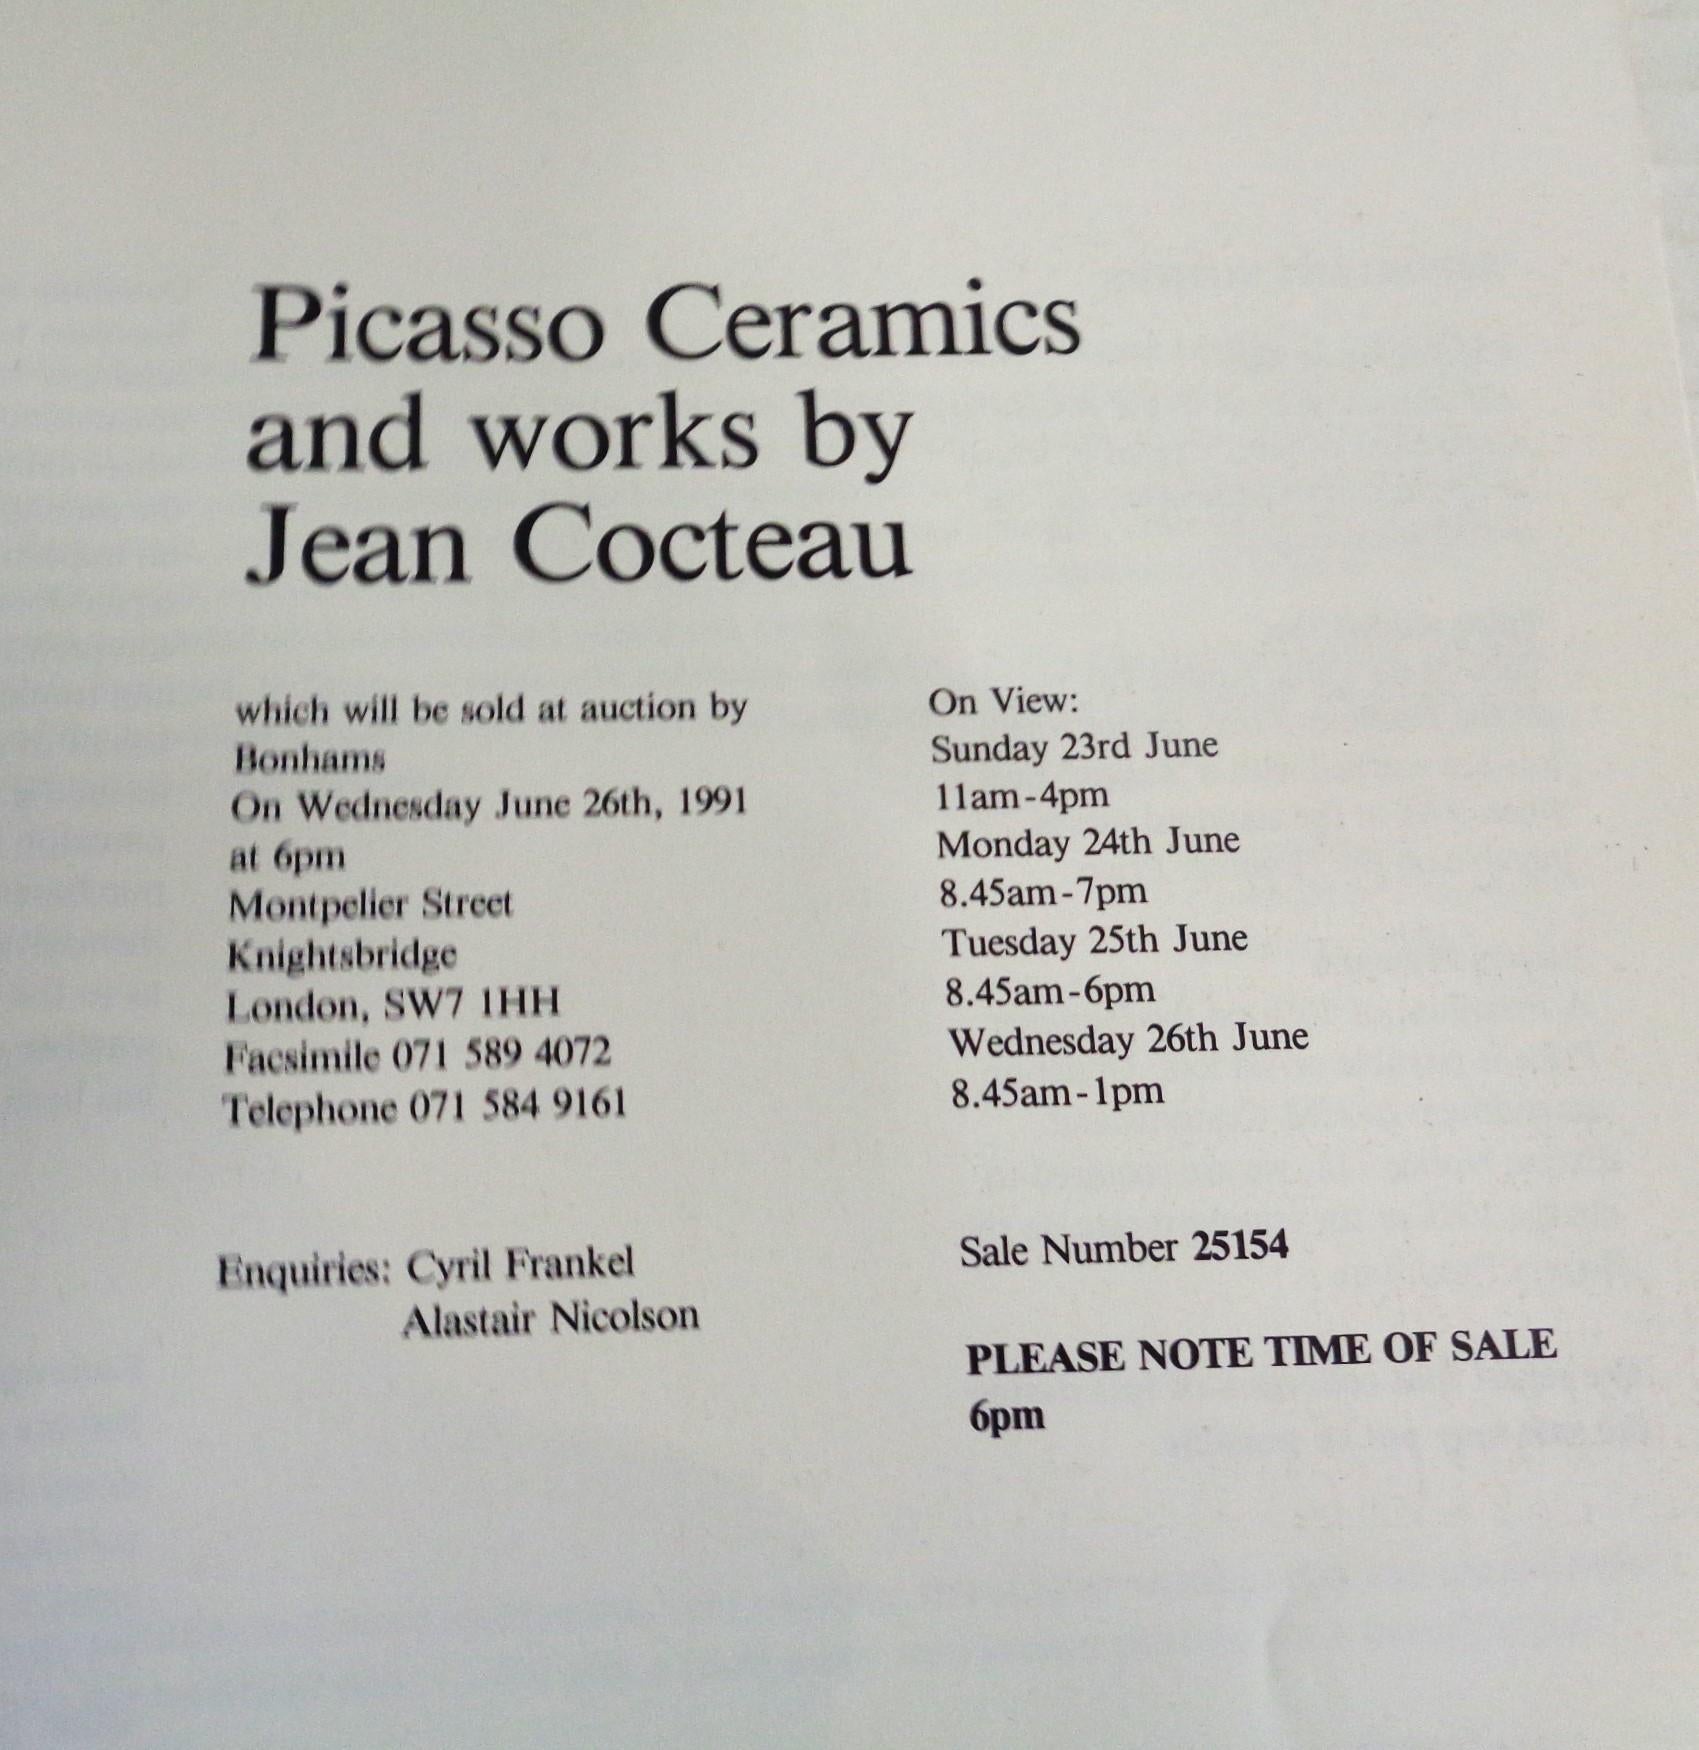 Mid-Century Modern PICASSO CERAMICS and works by Jean Cocteau - 1991 Bonhams, London For Sale